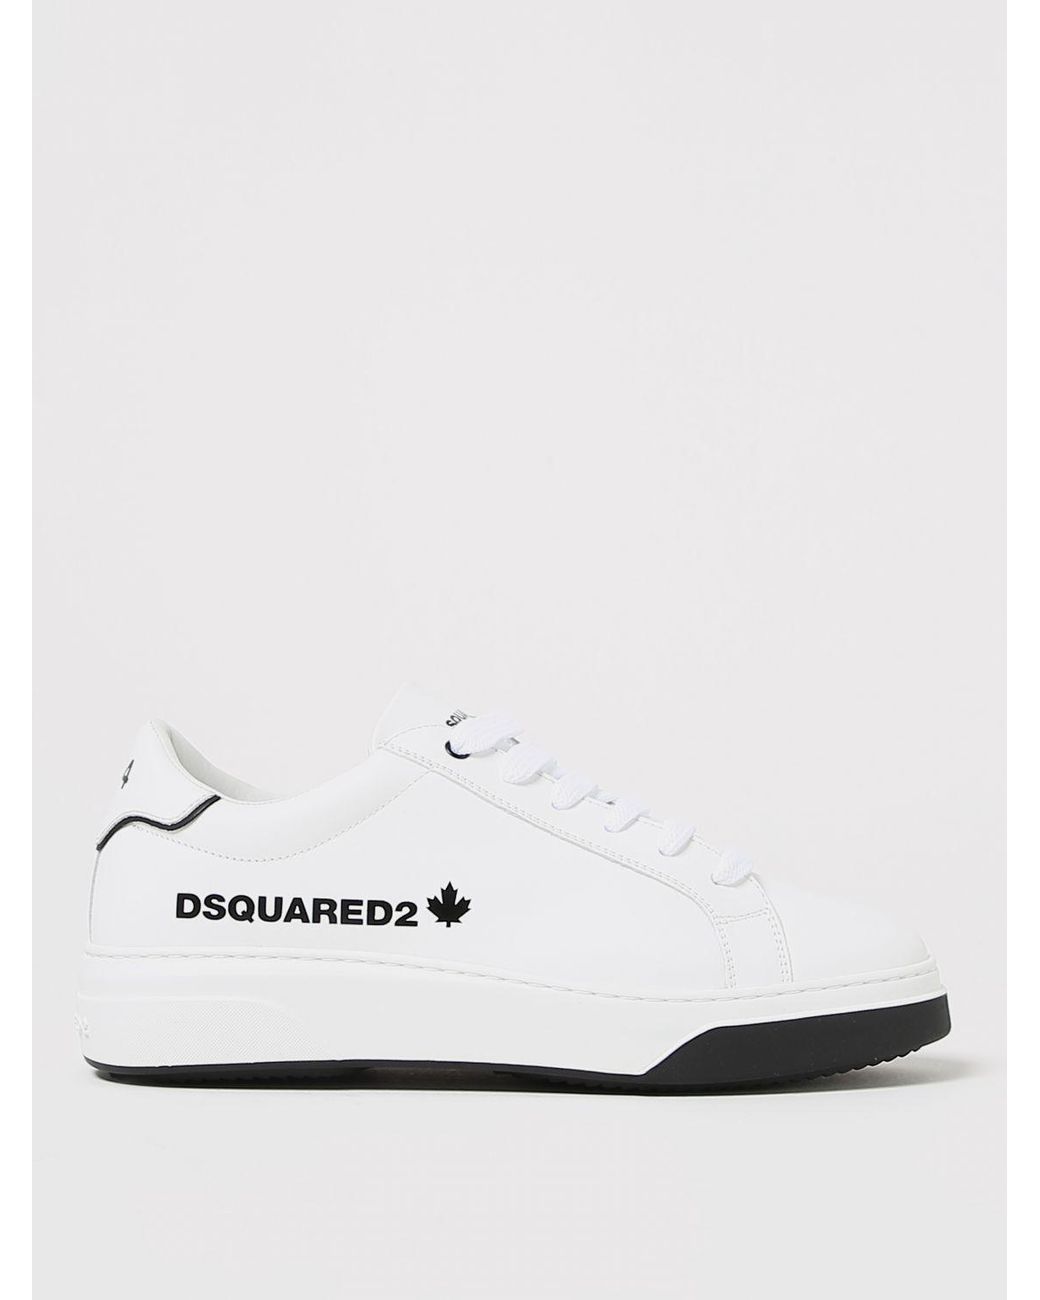 DSquared² Bumper Sneakers In Leather in White for Men | Lyst UK